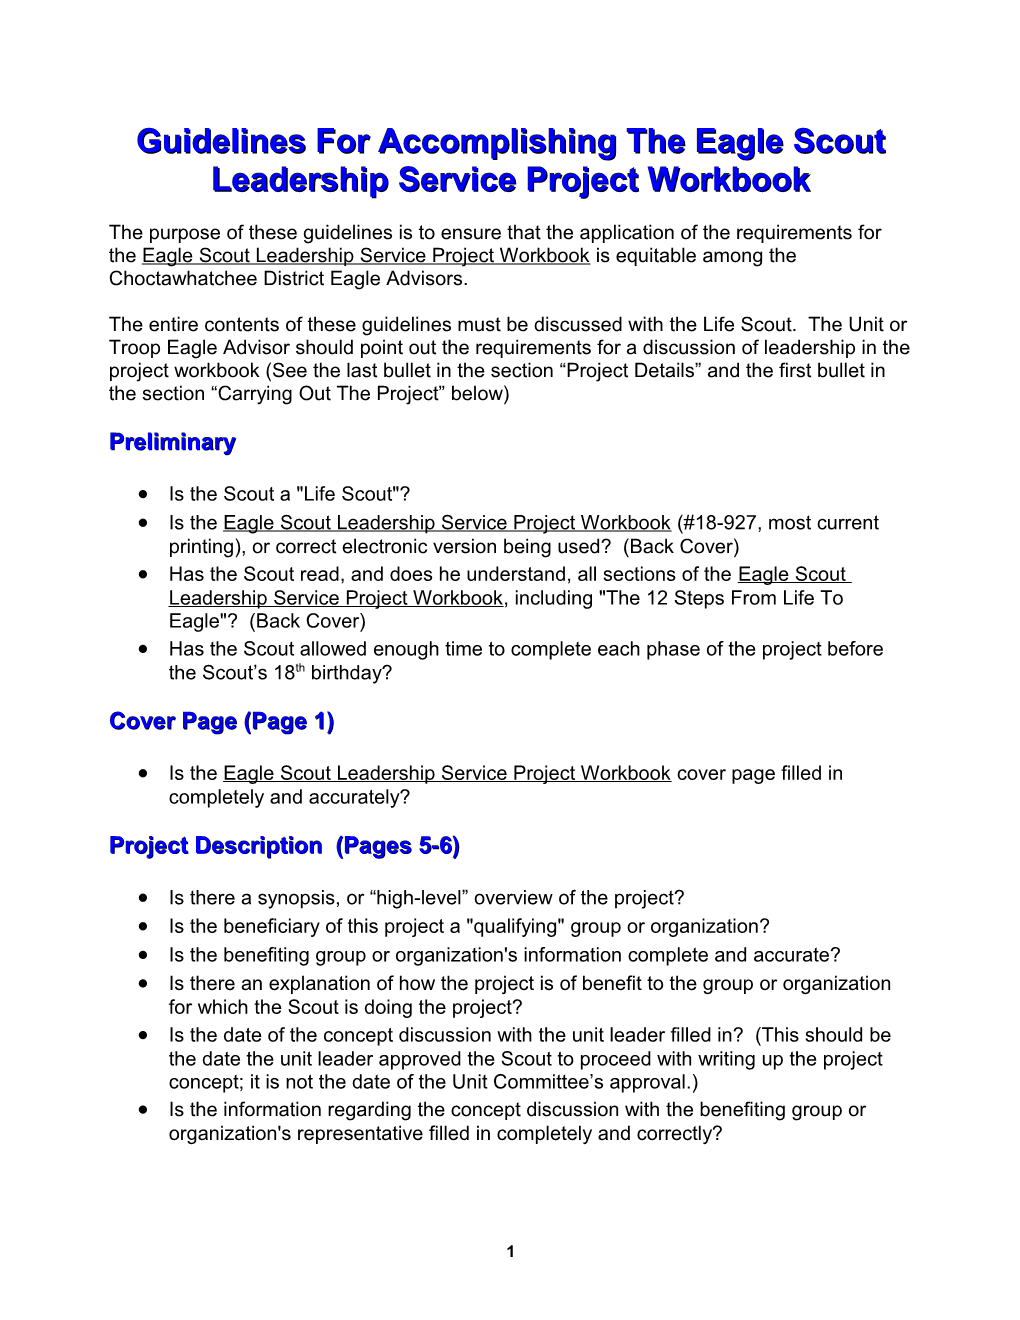 Eagle Scout Leadership Service Project Workbook Checklist